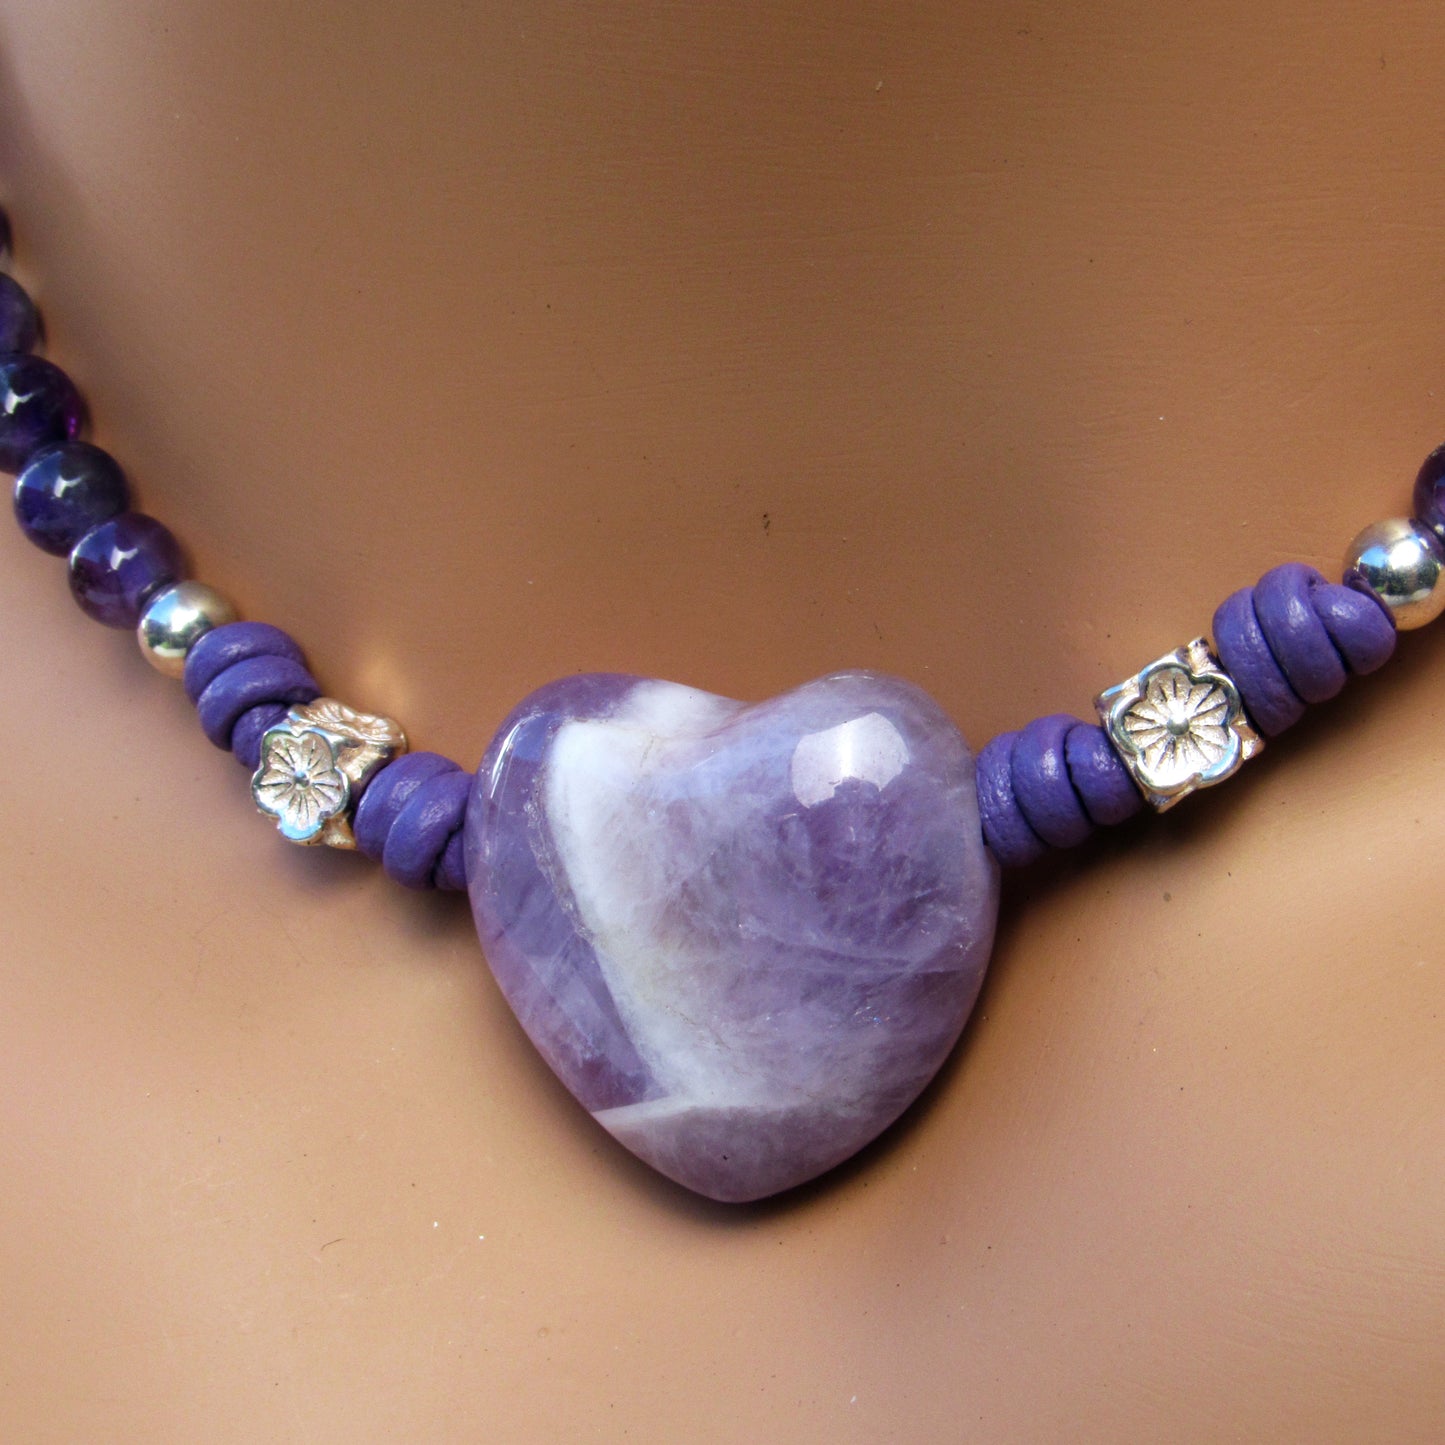 Amethyst gemstone and heart with sterling silver on leather necklace